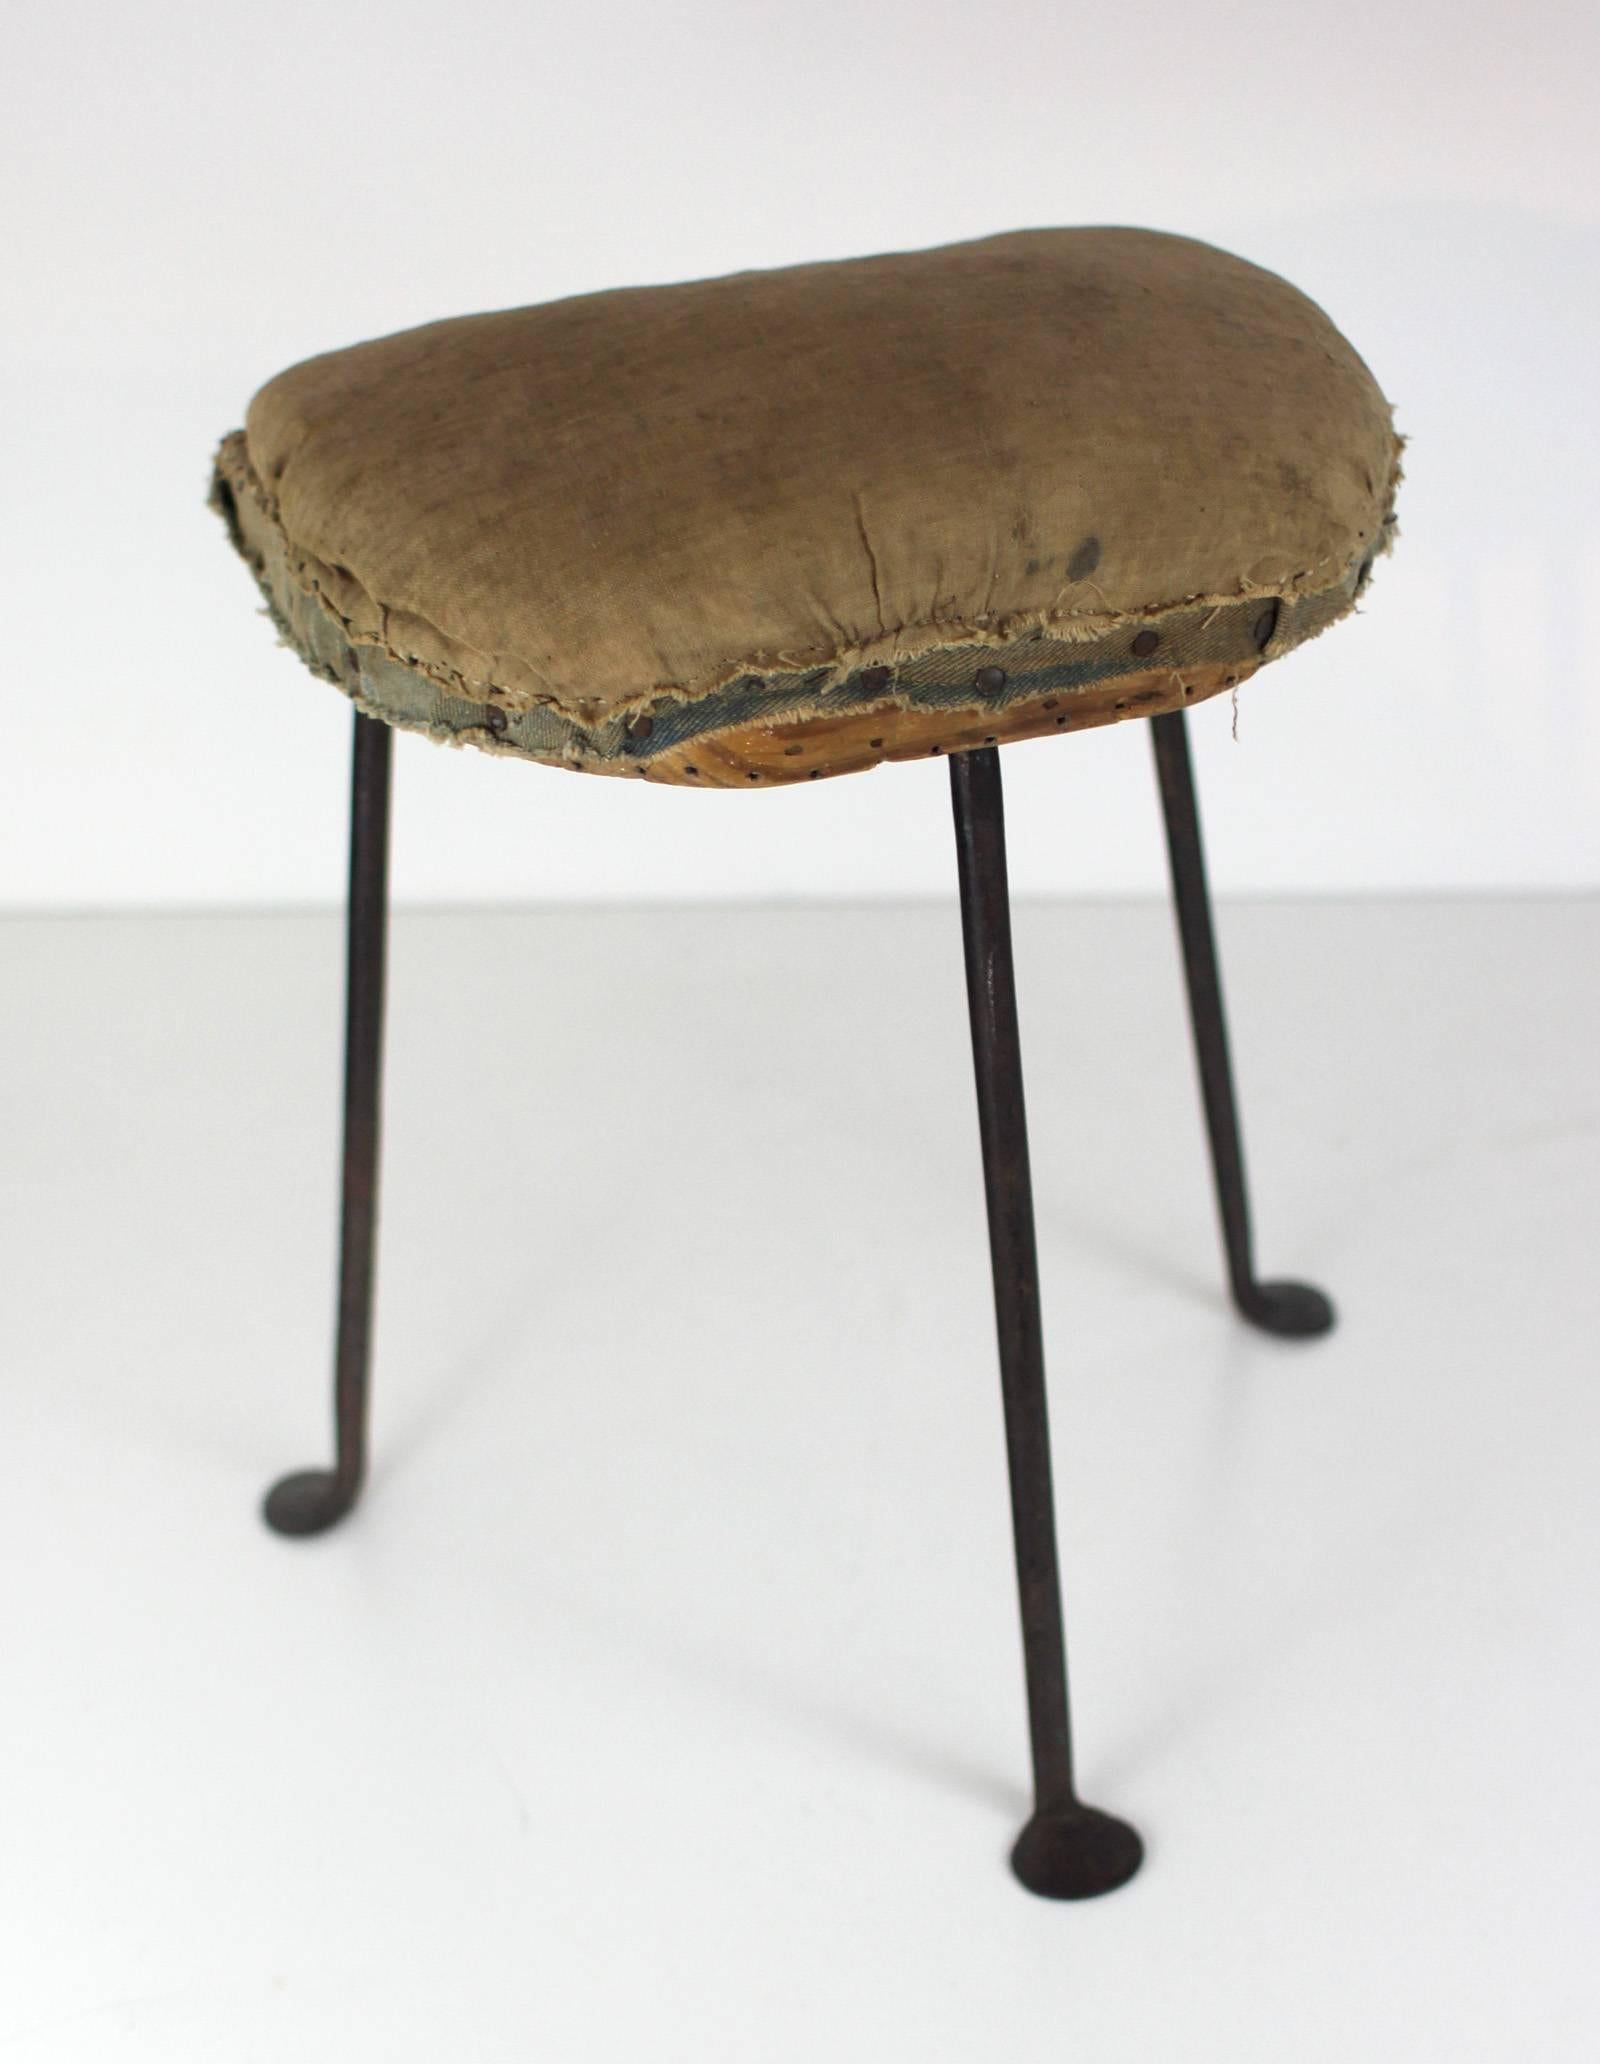 Exceptional tripod stool, upholstered over wood, with fine wrought iron legs that end in penny-shaped feet, all original; American, circa 1820.